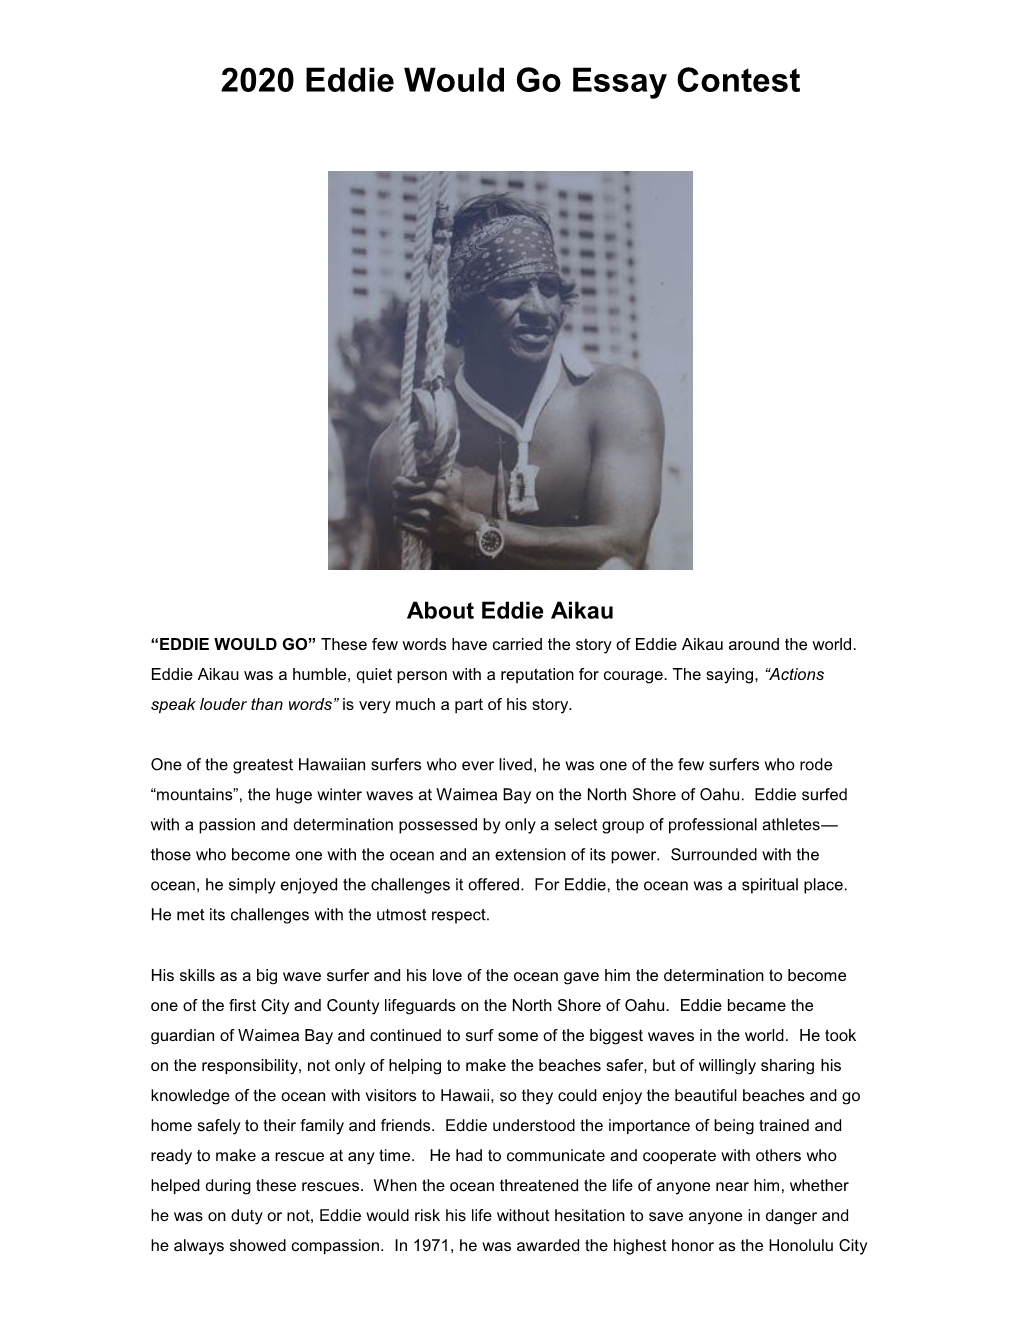 The Eddie Aikau Essay Contest Is Open to All Students in Grade Levels 7, 8, 9, and 10 Who Are Currently Enrolled in Public Or Private Schools in Hawaii